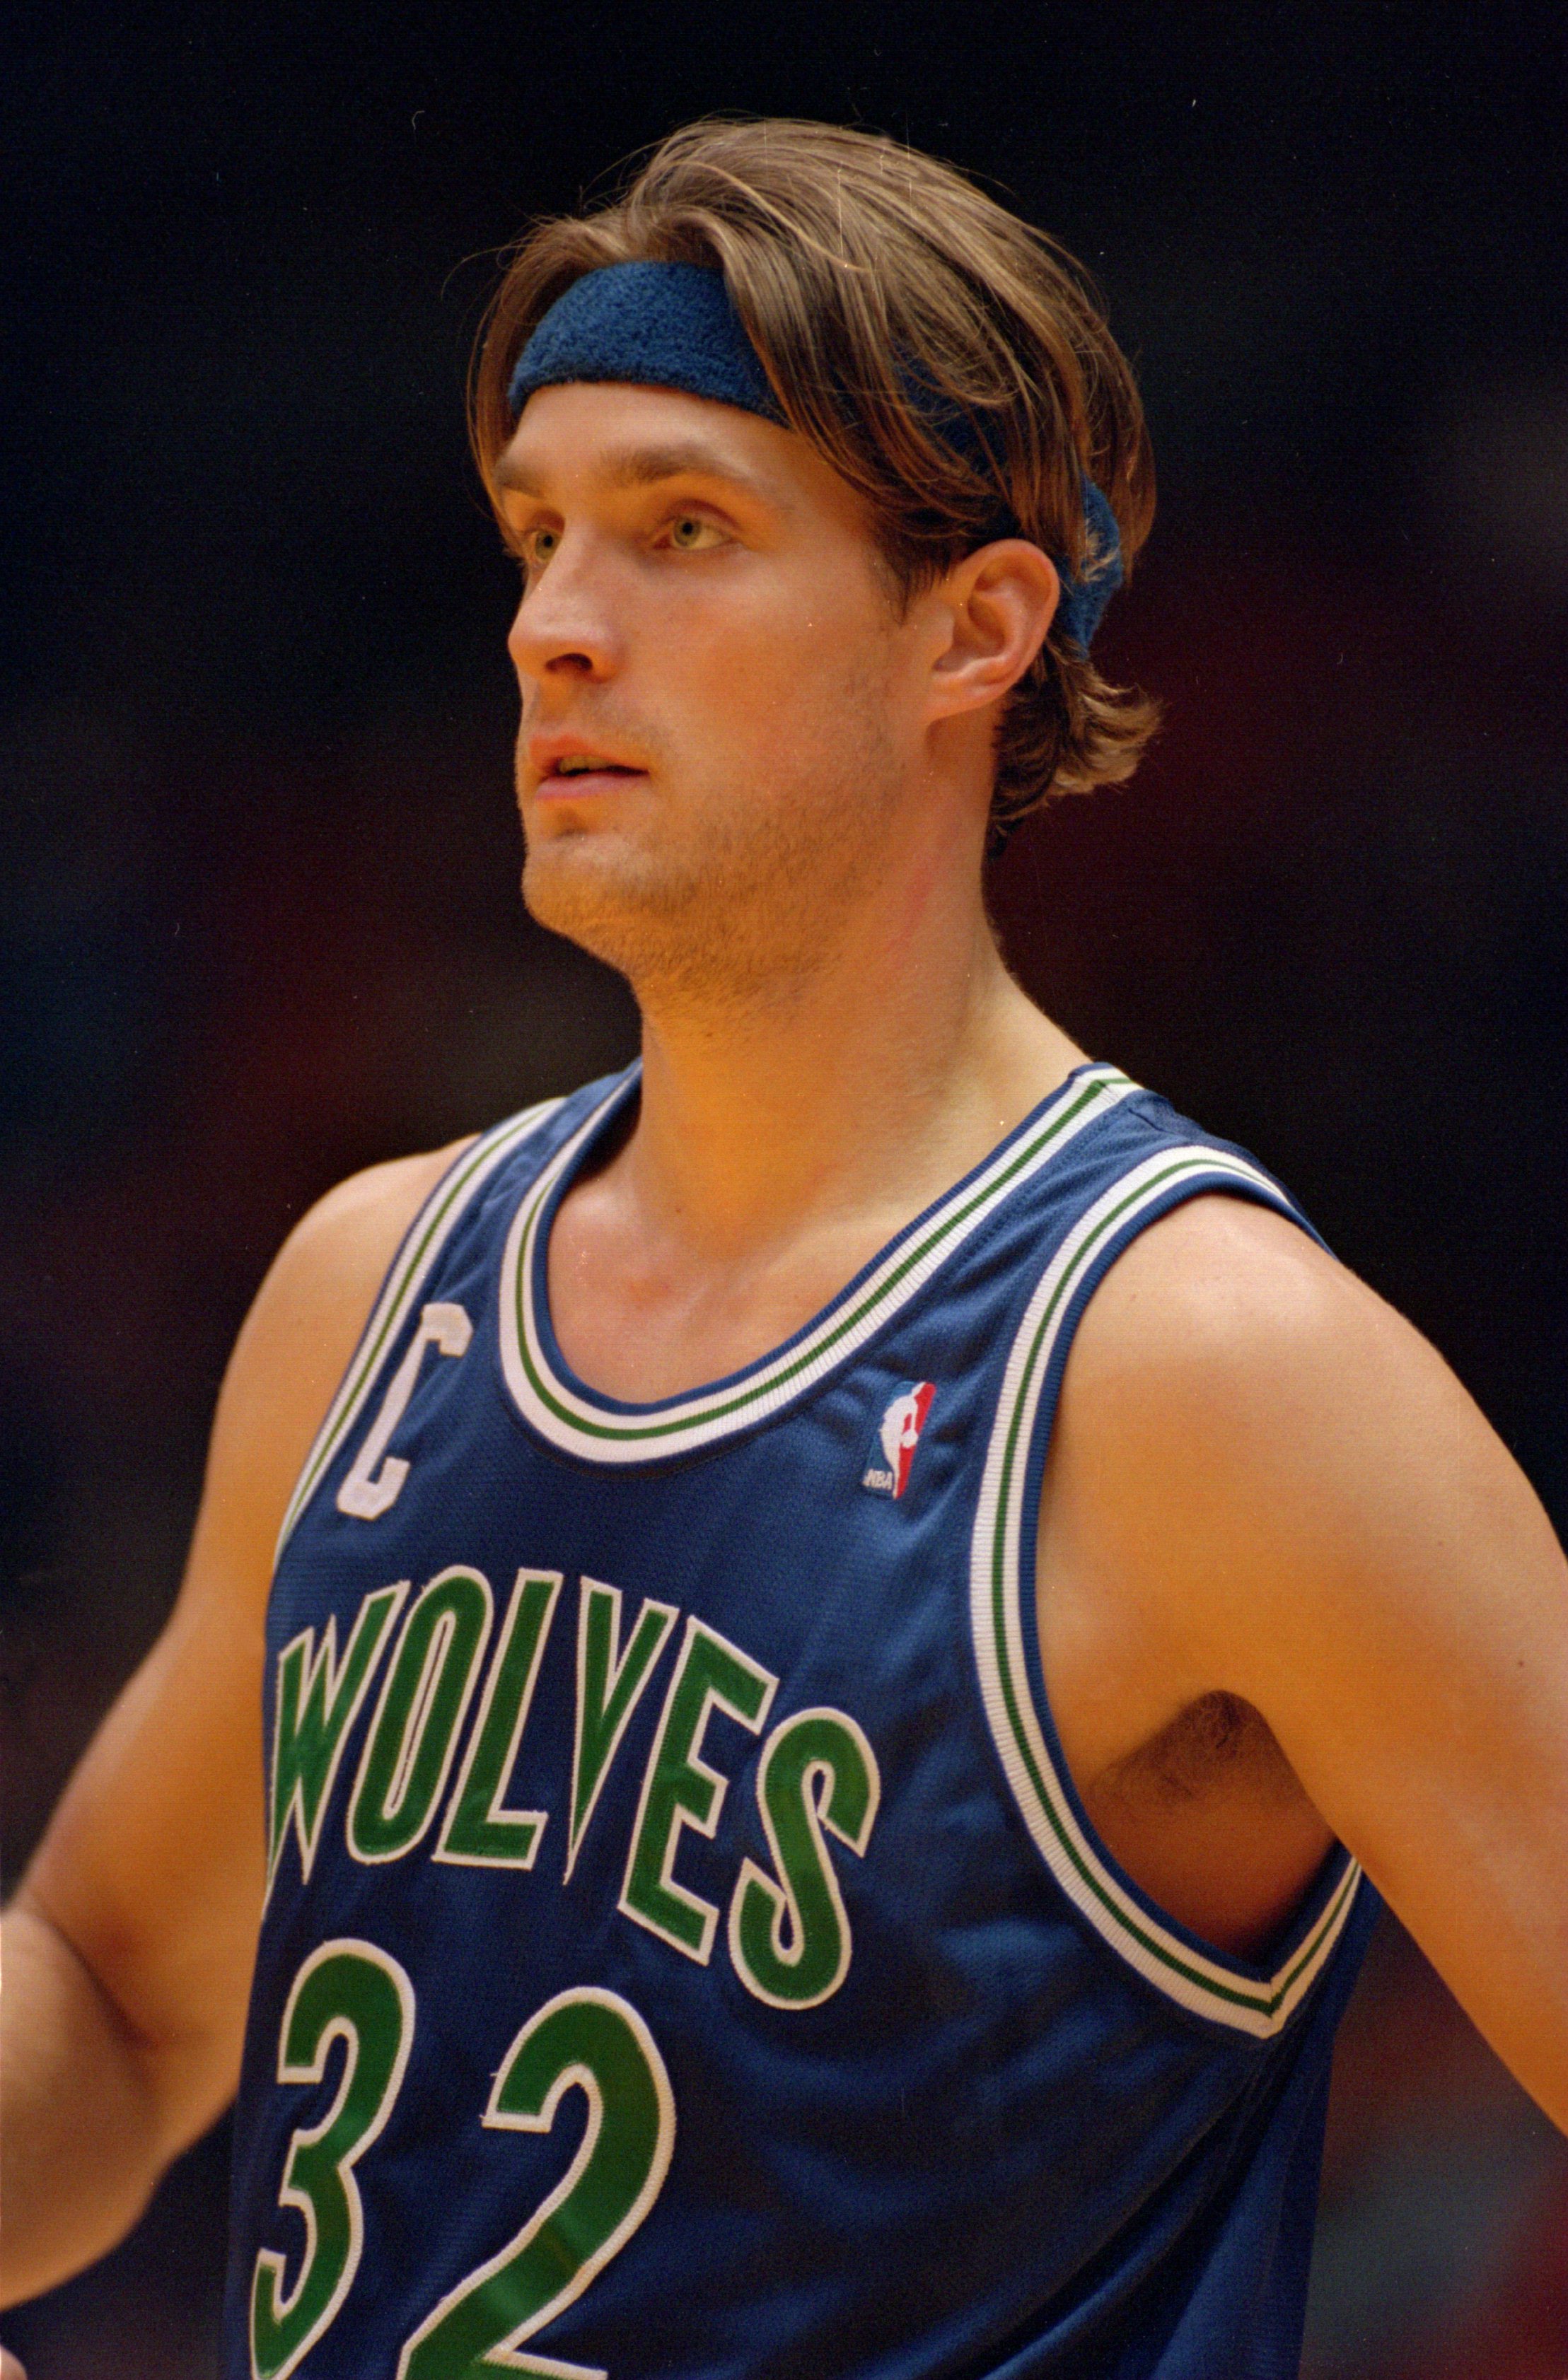 5 Dec 1993: Center Christian Laettner of the Minnesota Timberwolves relaxes on the court during of break in the action of the Timberwolves 101-99 loss to the Los Angeles Lakers at the Great Western Forum in Inglewood, California.